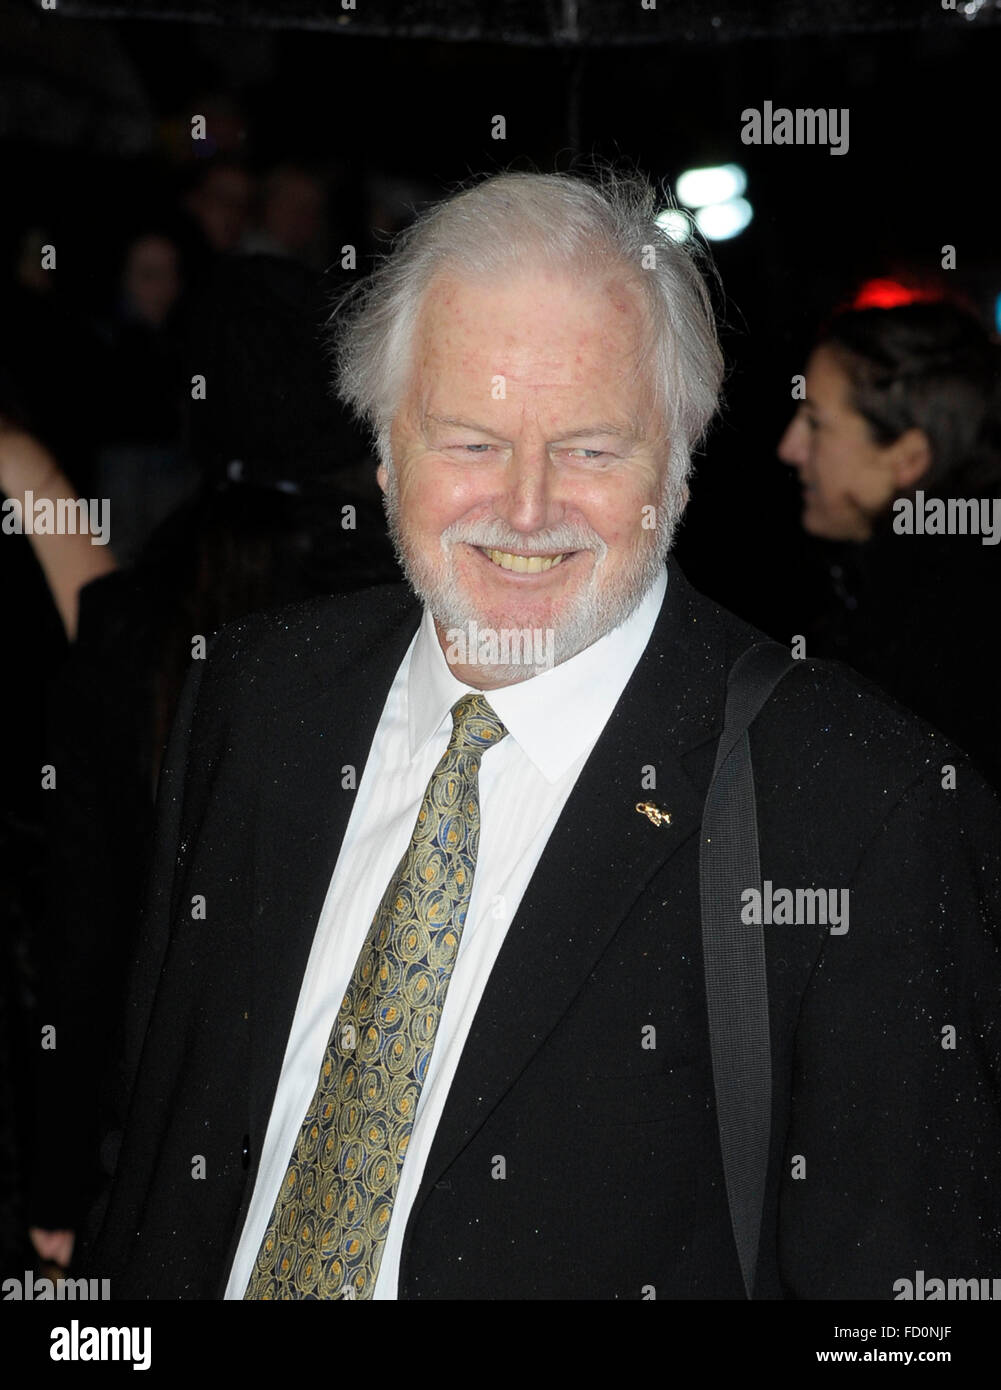 London, UK. 26th January, 2016. Ian Lavender attending the World  Premiere of DAD'S ARMY at the Odeon  Lericester Square  London  26th January 2016 Credit:  Peter Phillips/Alamy Live News Stock Photo